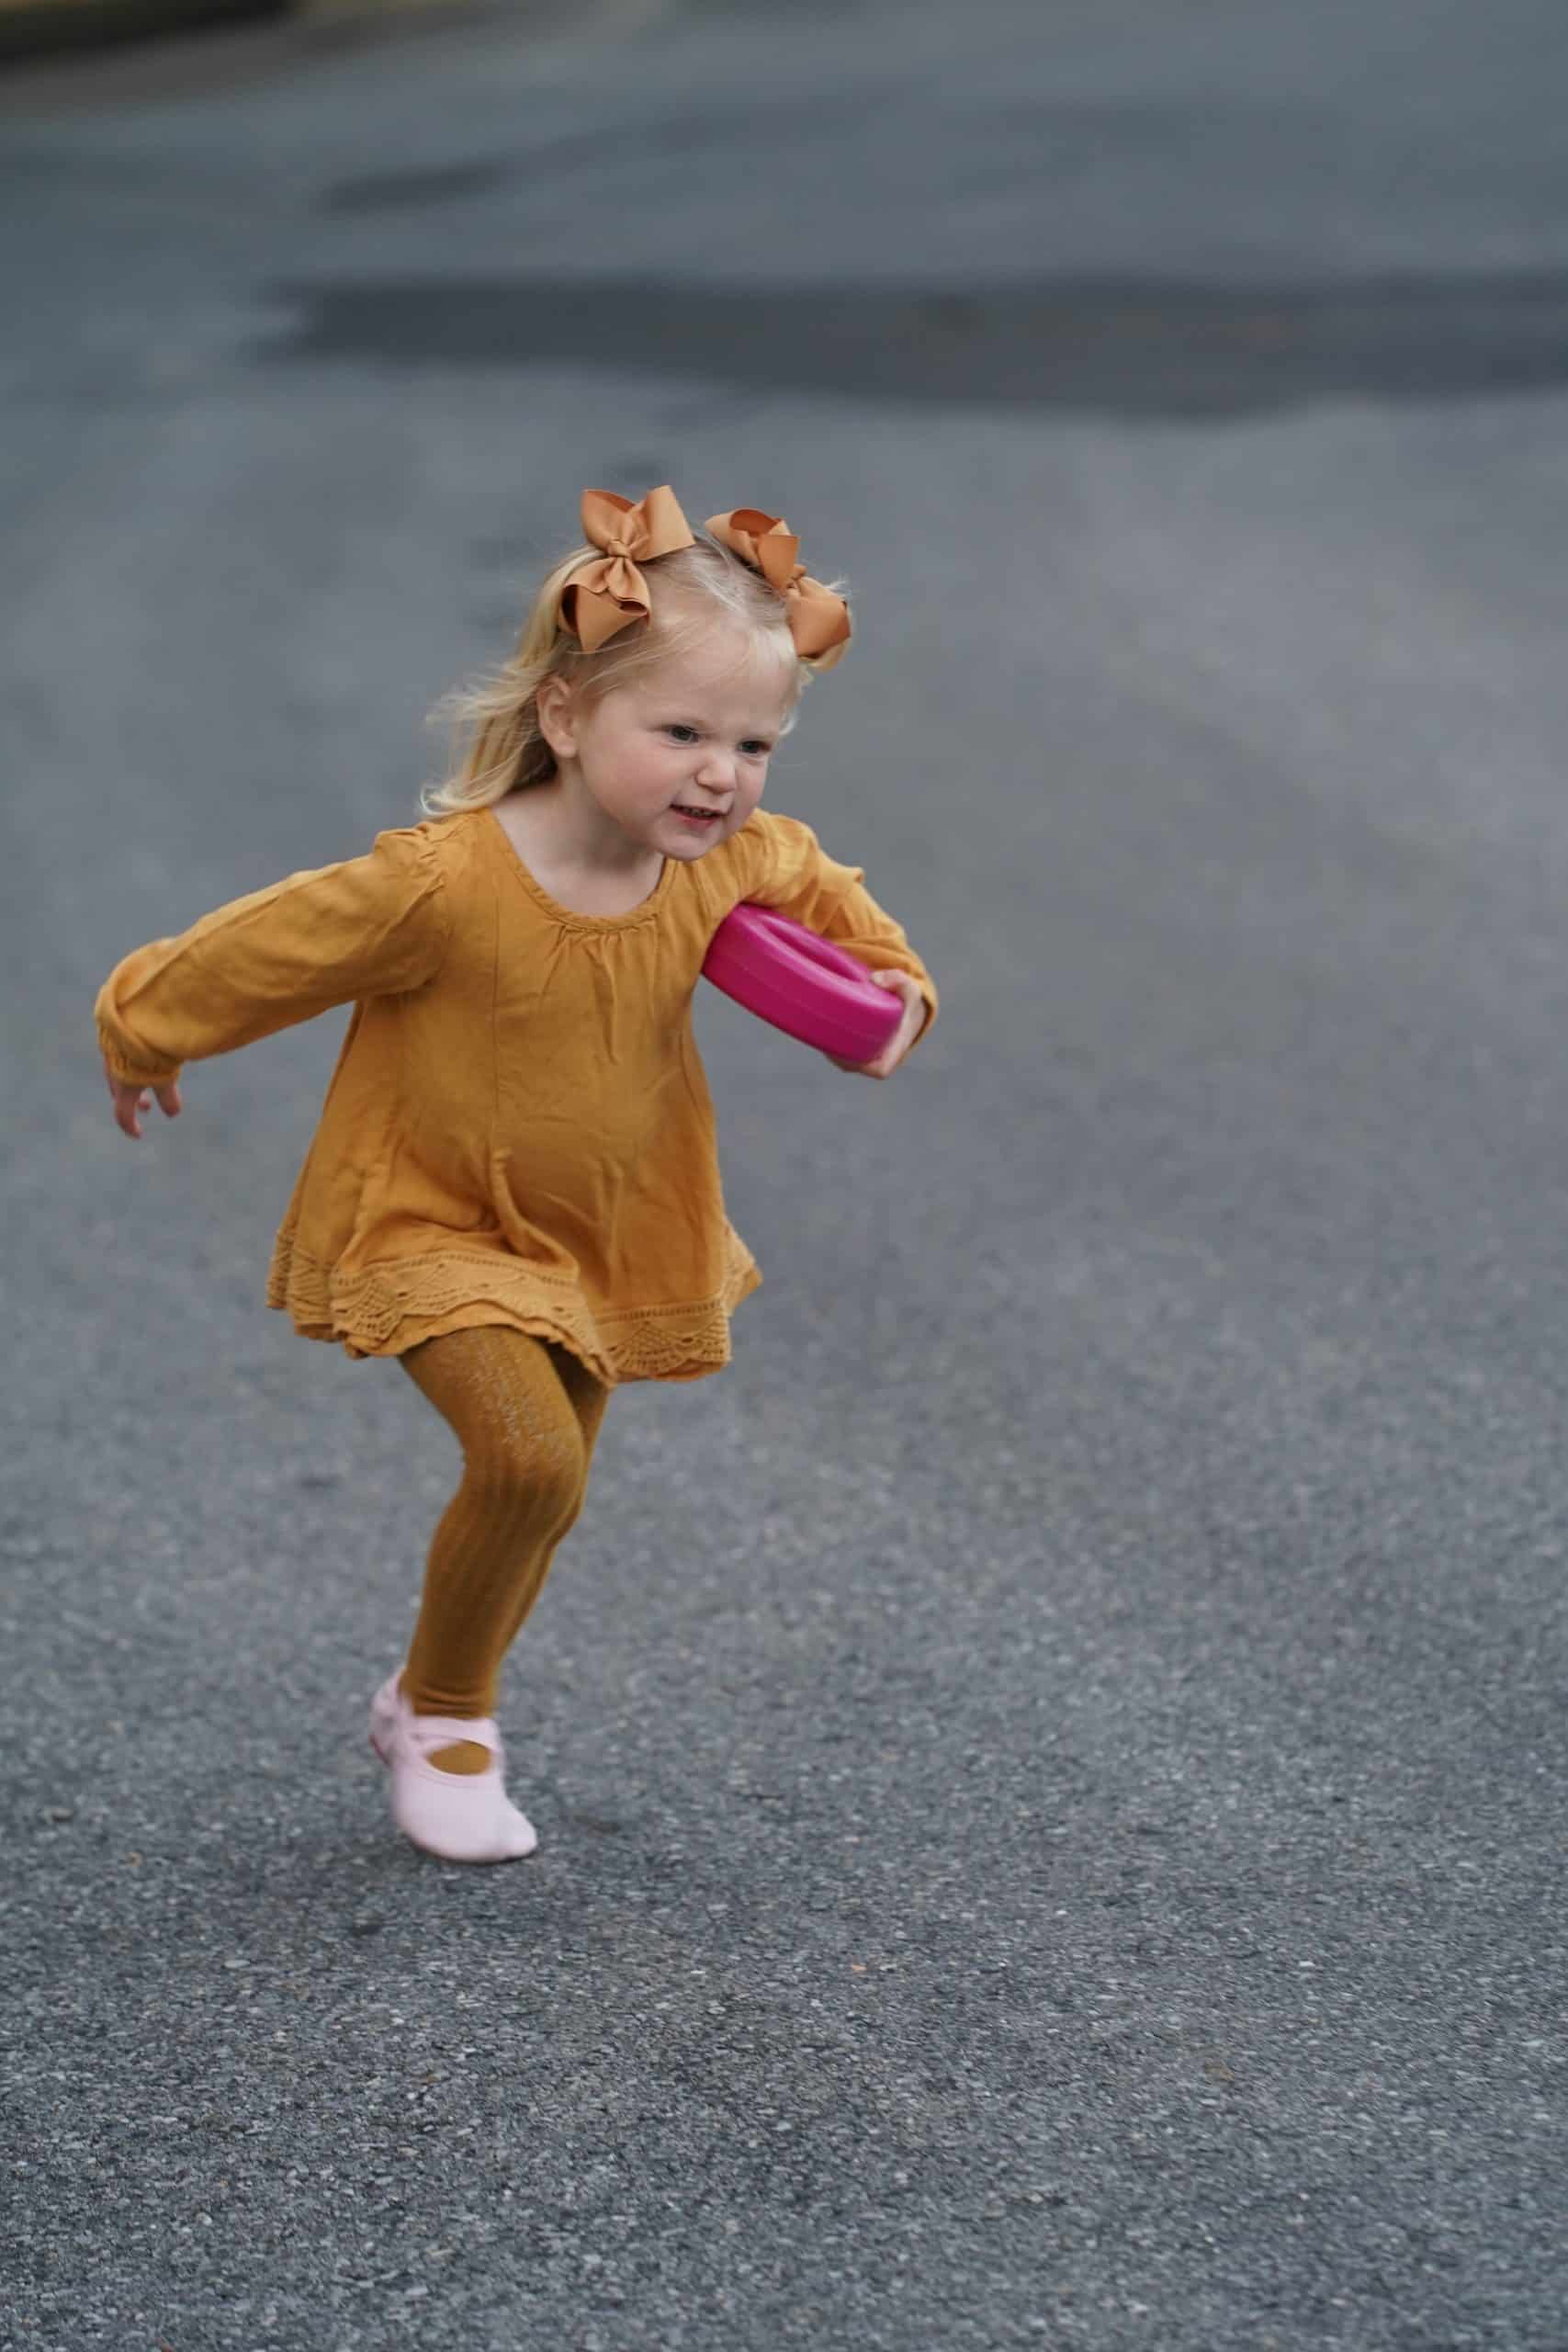 Toddler in costume runs across the parking lot